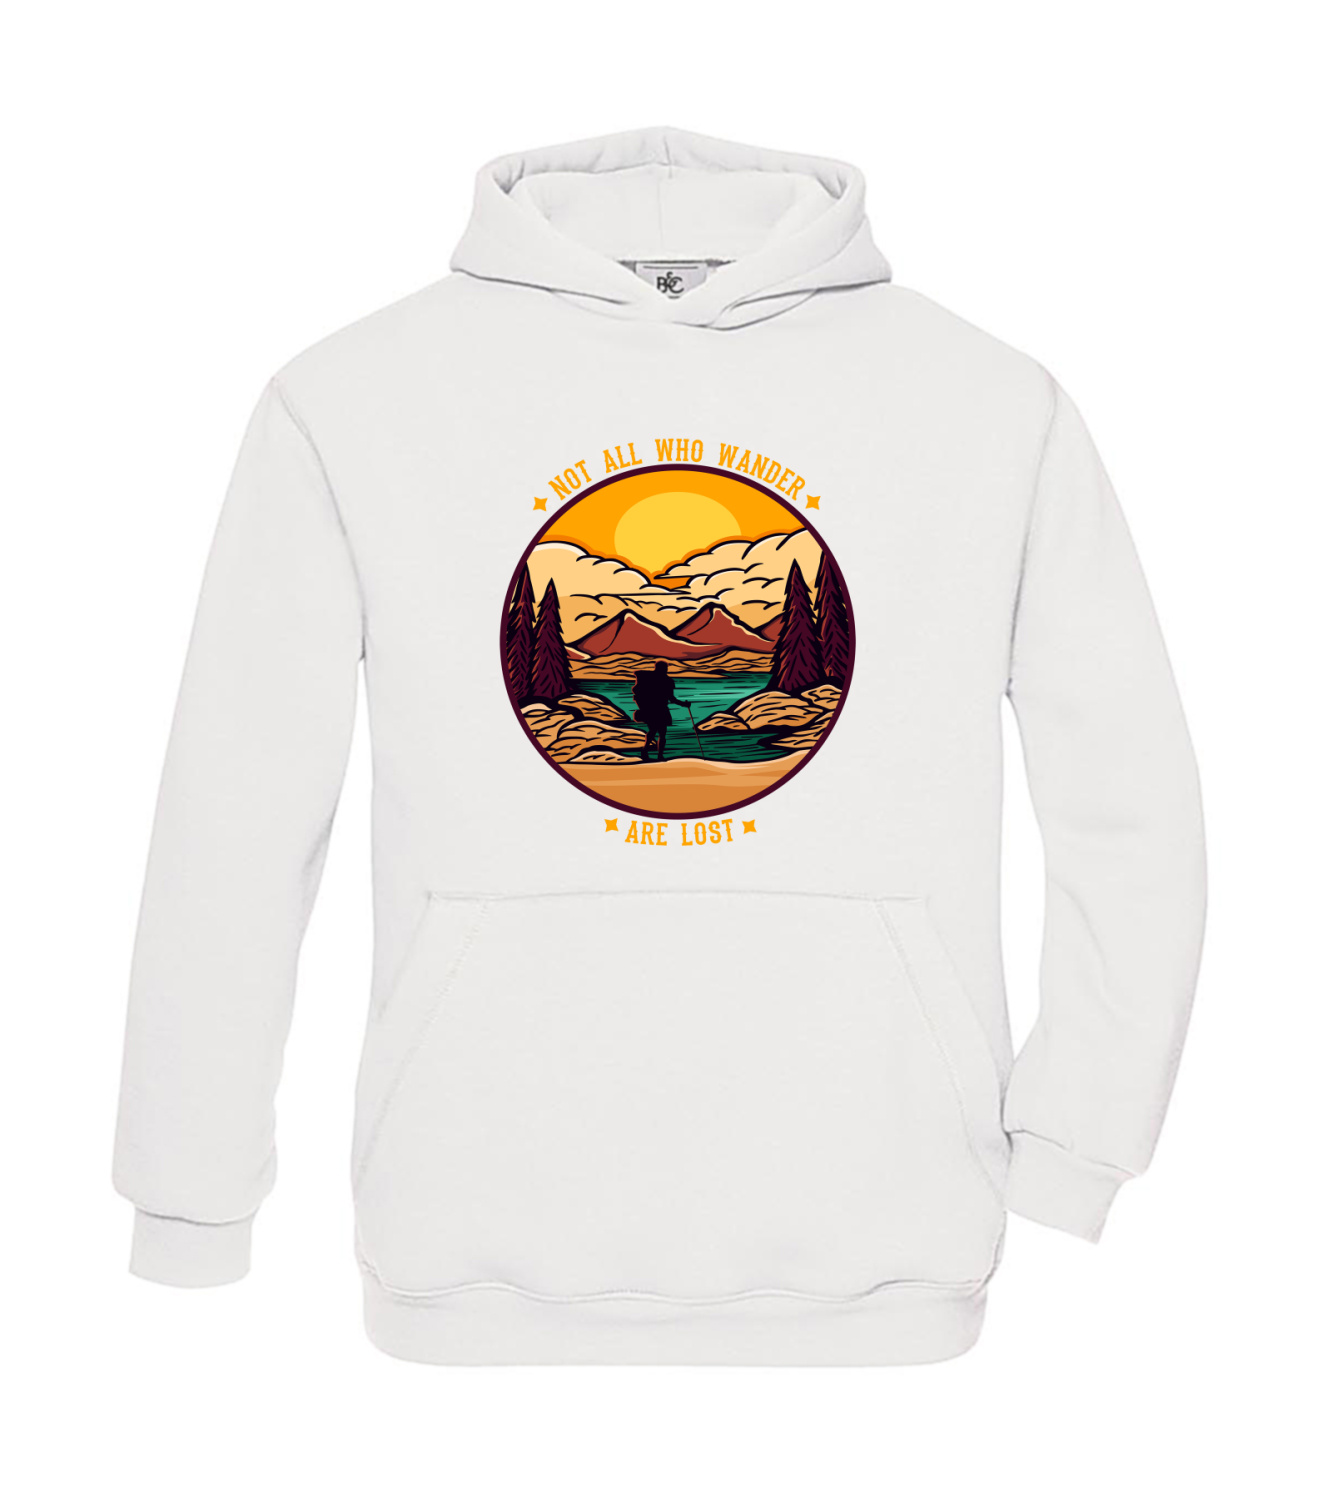 Hoodie Kinder Outdoor - Not all who wander are lost